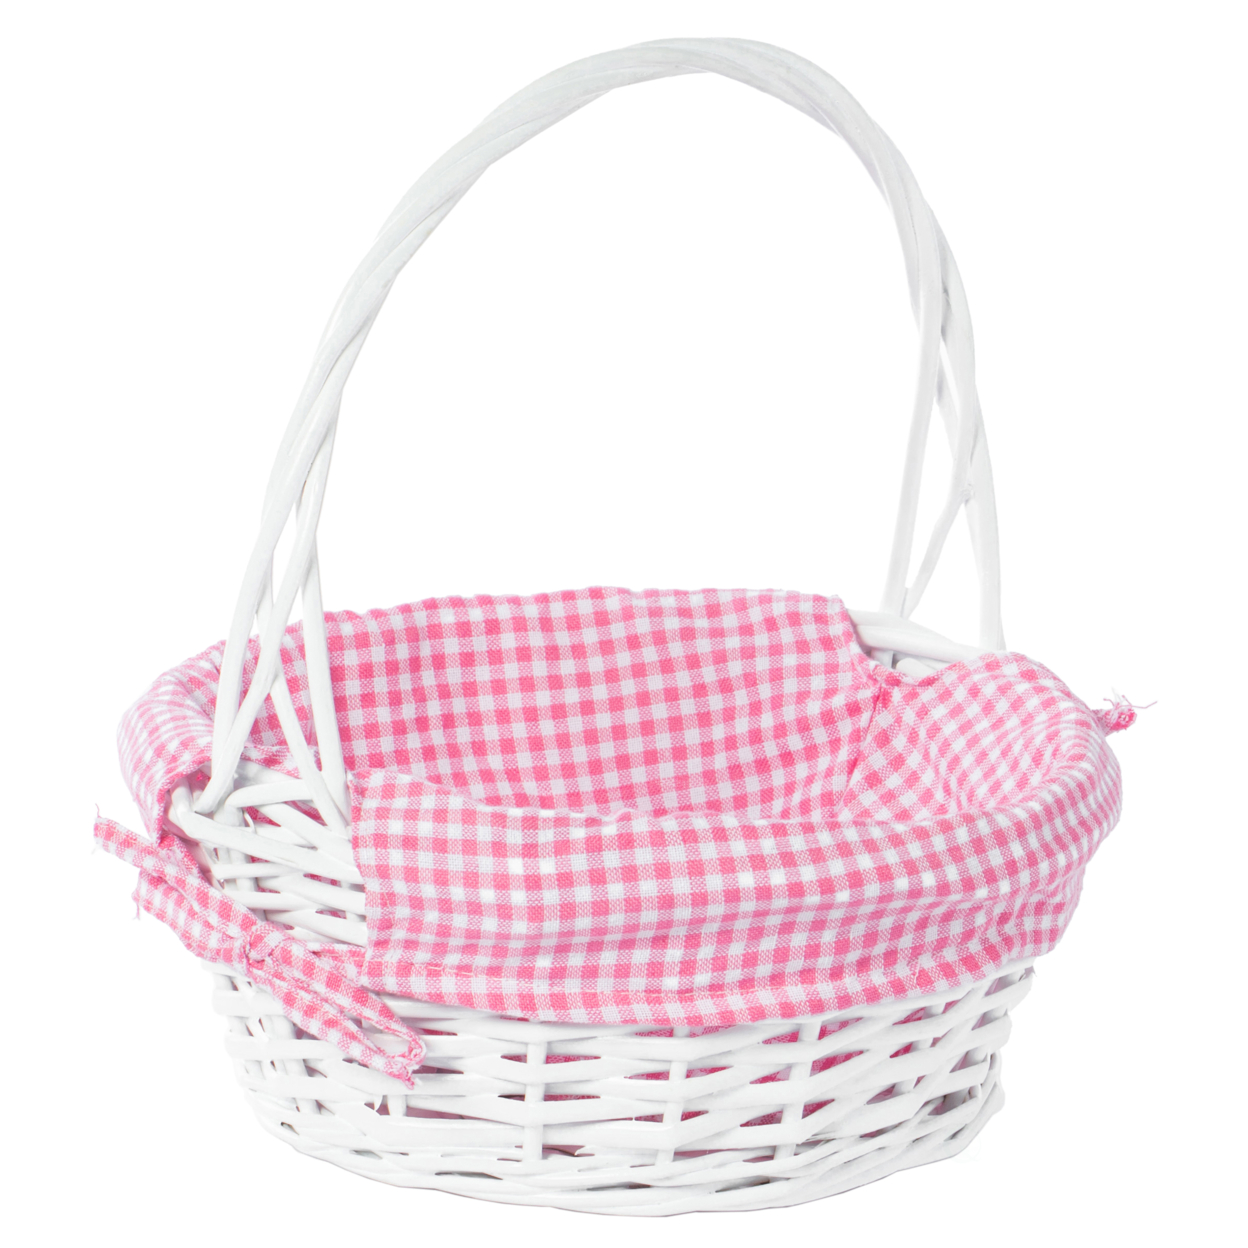 White Round Willow Gift Basket, With Blue And White Gingham Liner And Handles - Pink Small